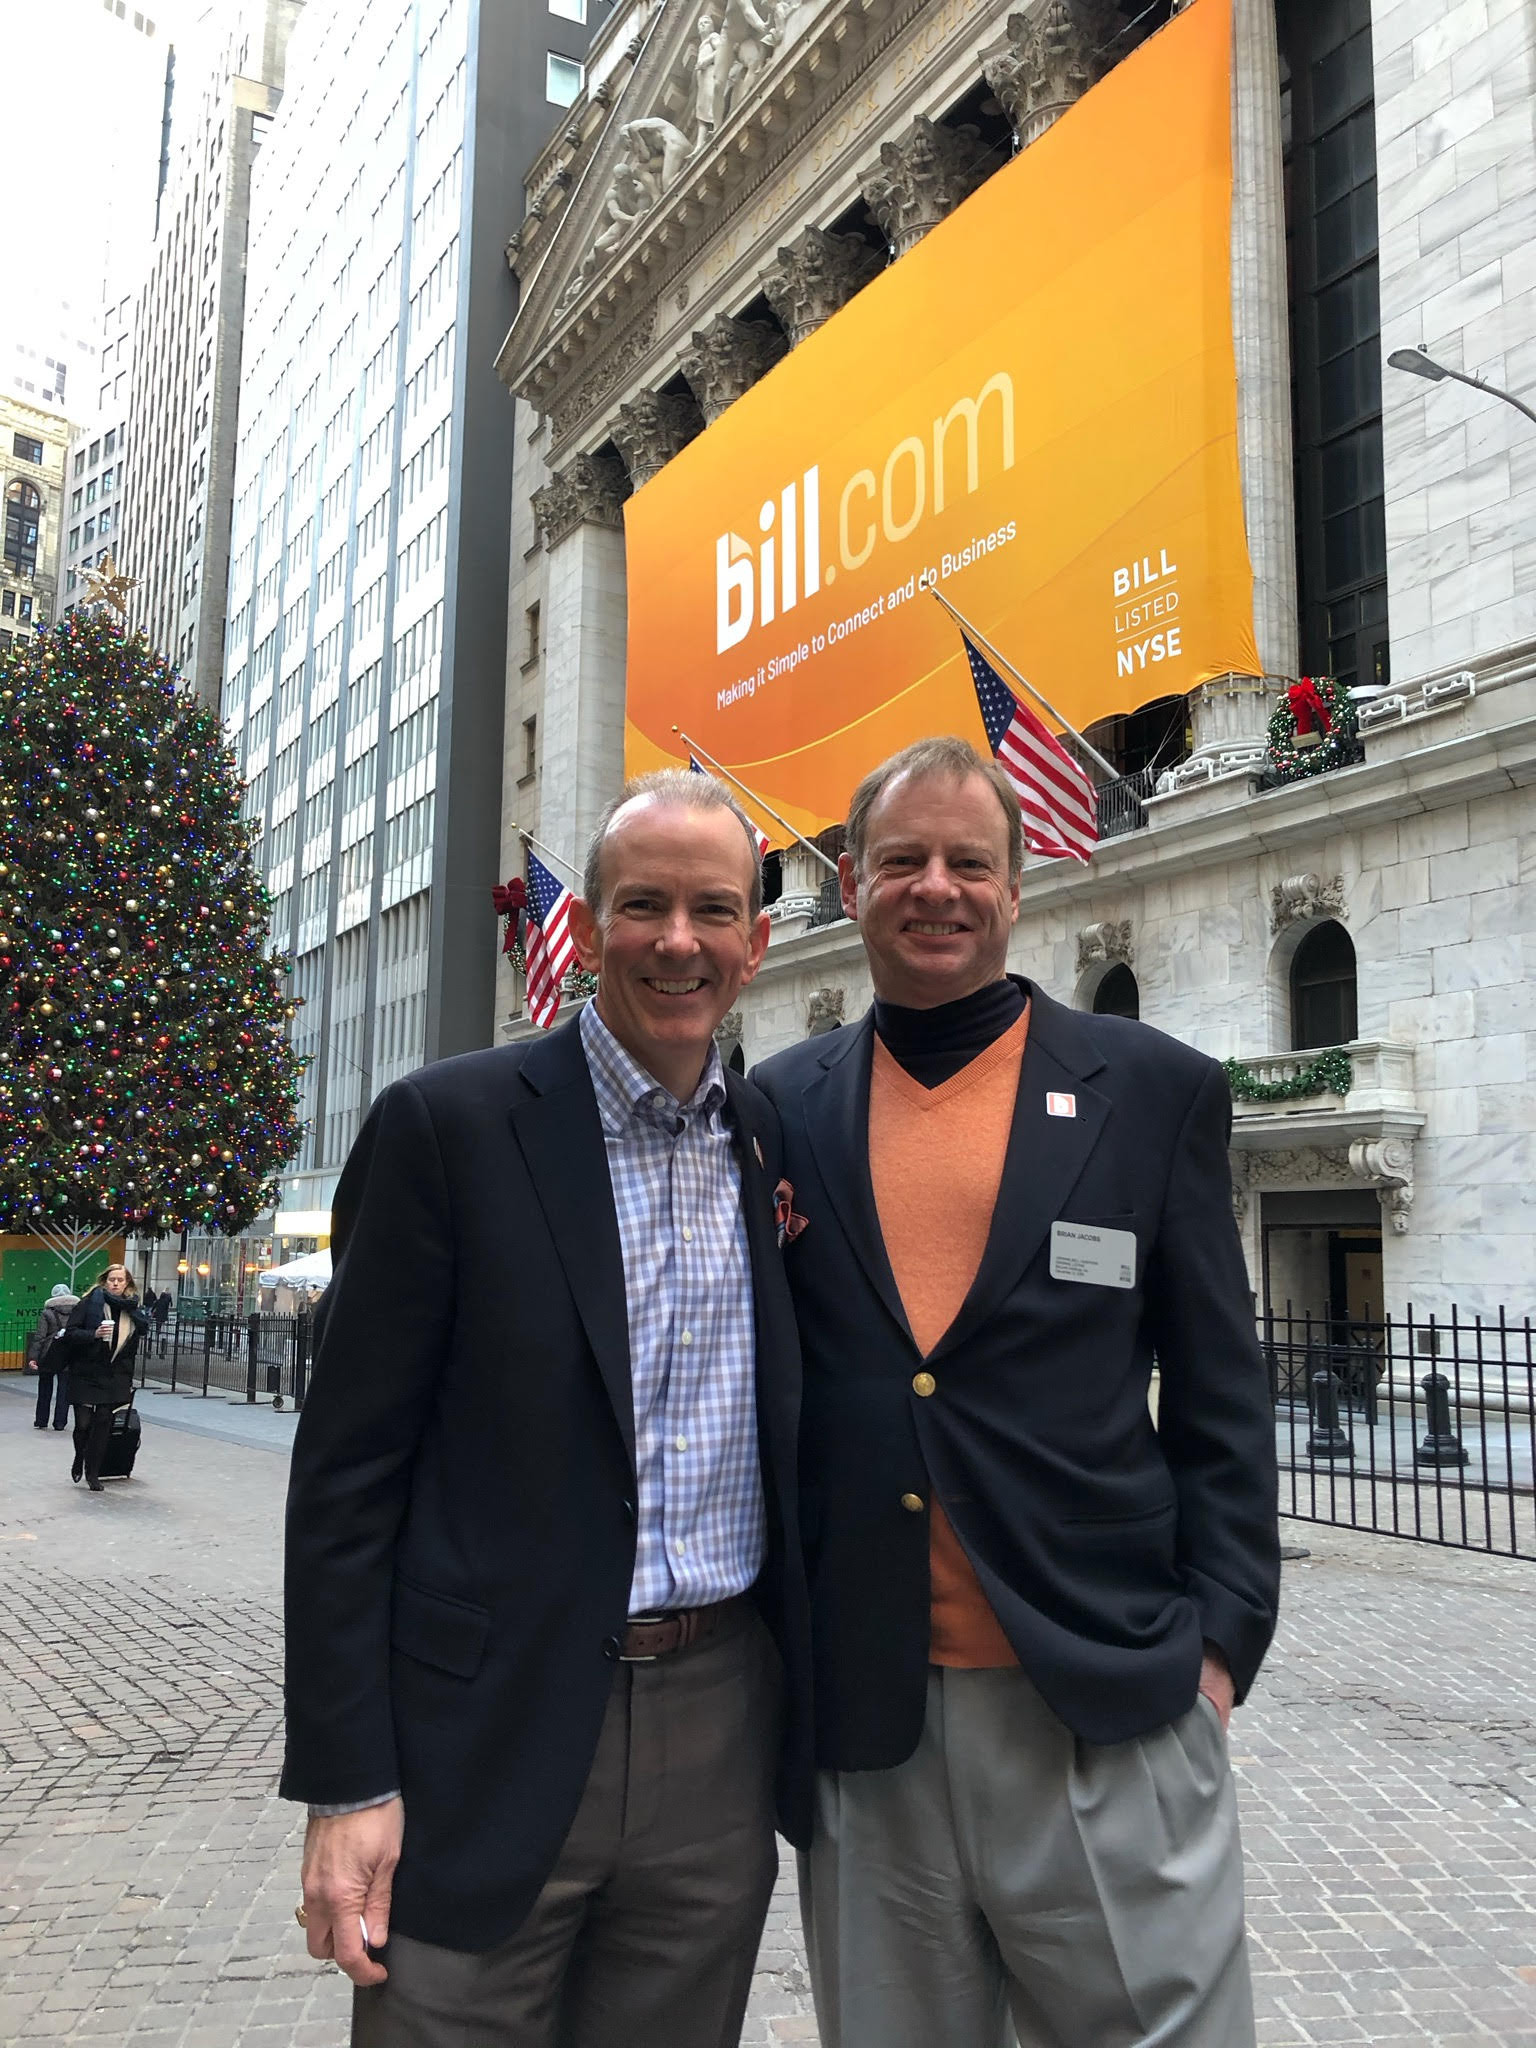 Proud moment in front of the NYSE.